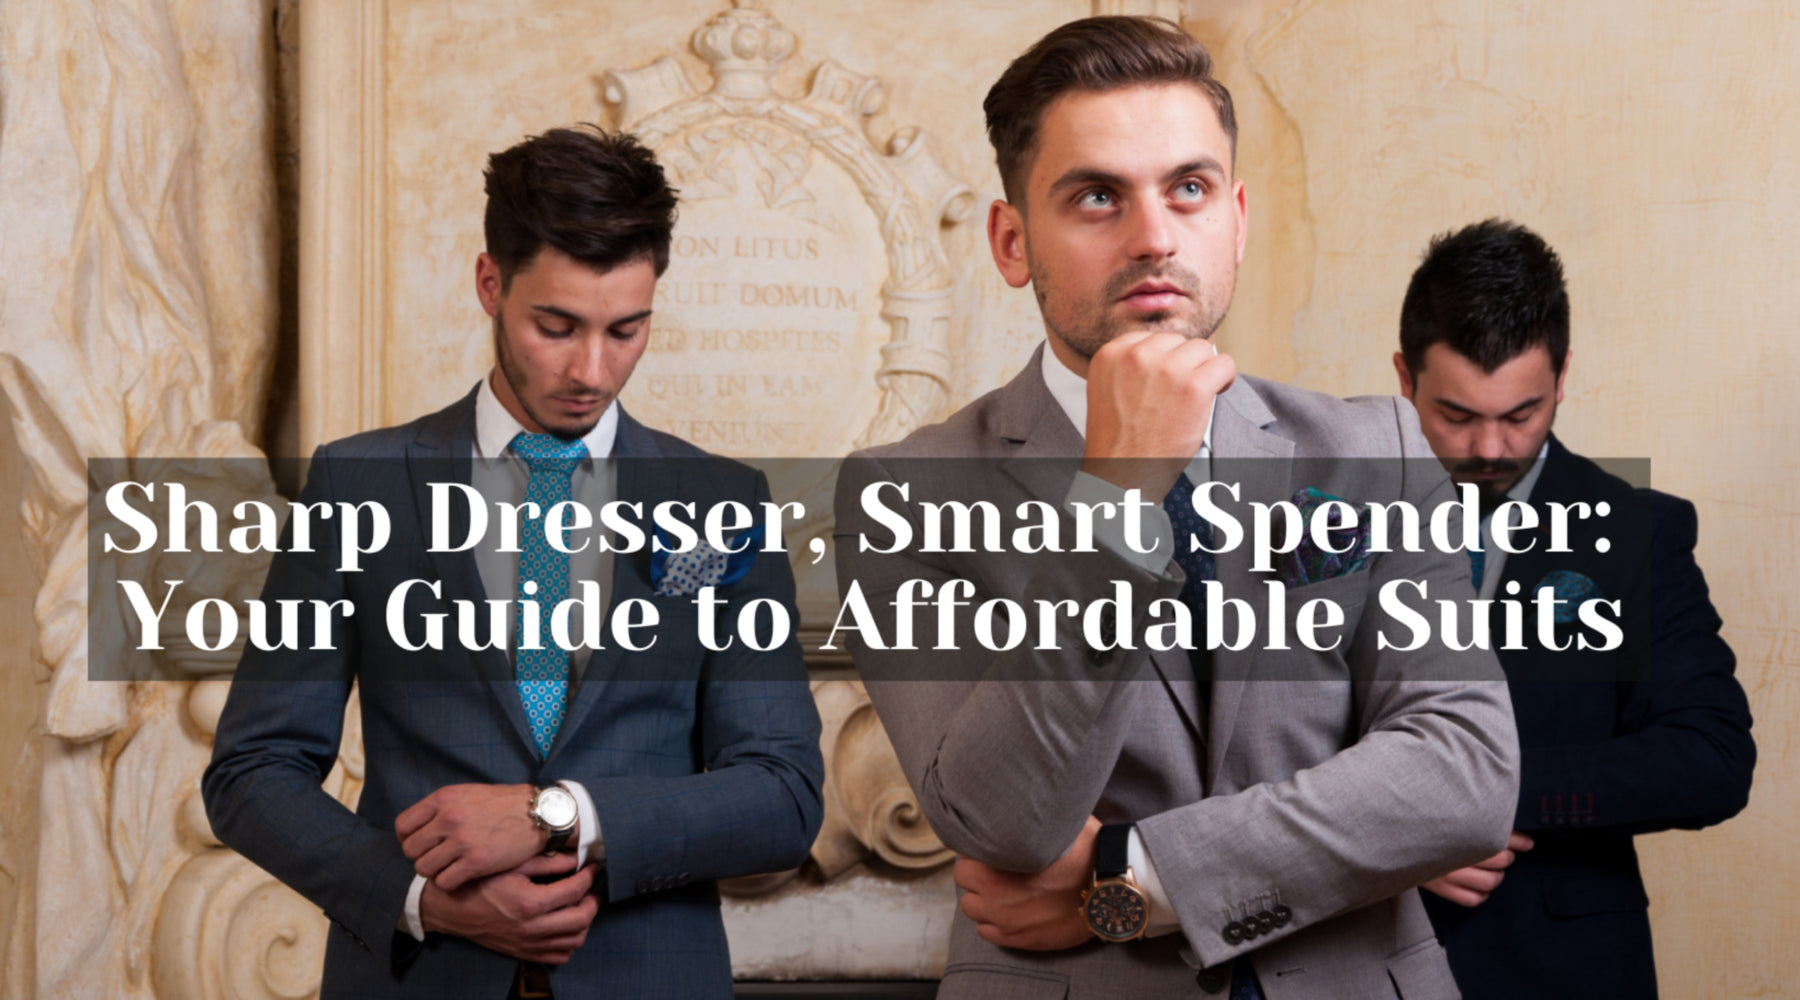 Sharp Dresser, Smart Spender: Your Guide to Affordable Suits